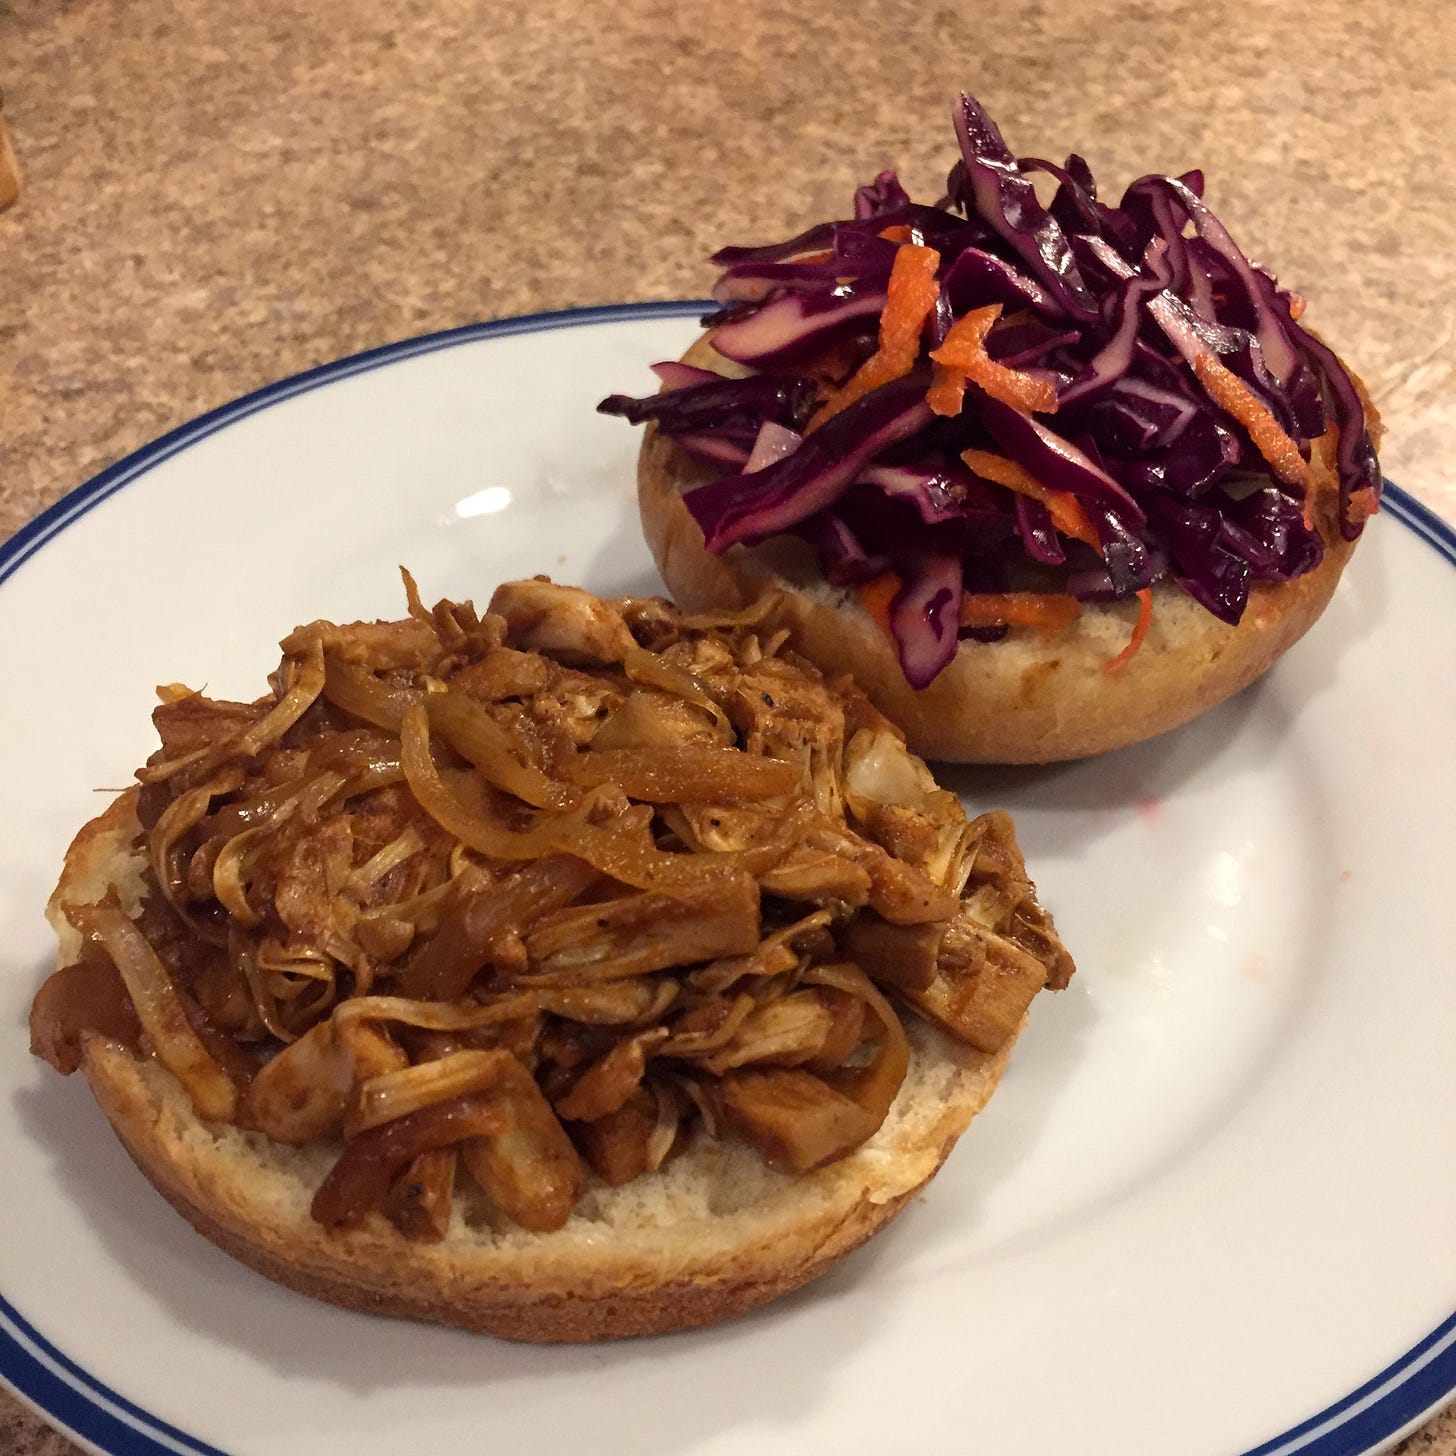 two halves of a brioche bun on a white plate. The bottom has pulled jackfruit and onions in barbecue sauce, and the top has red cabbage and carrot slaw.